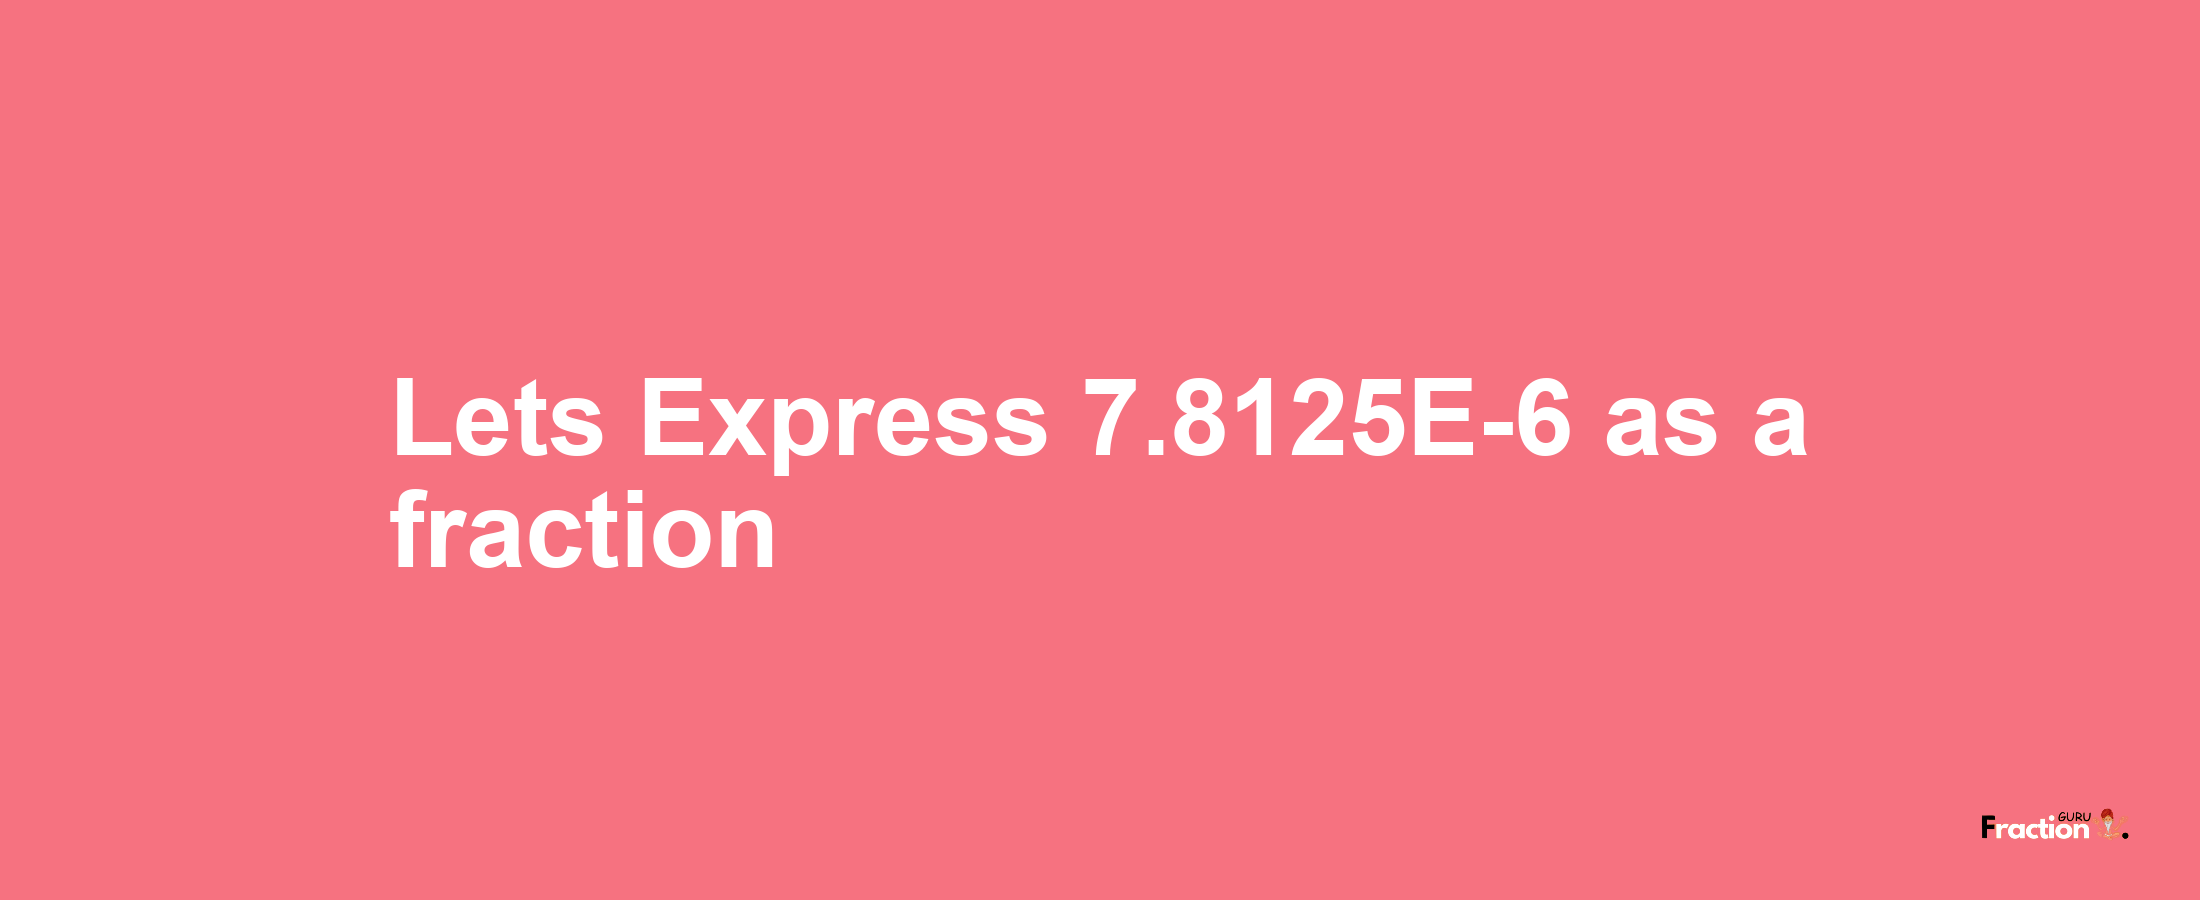 Lets Express 7.8125E-6 as afraction